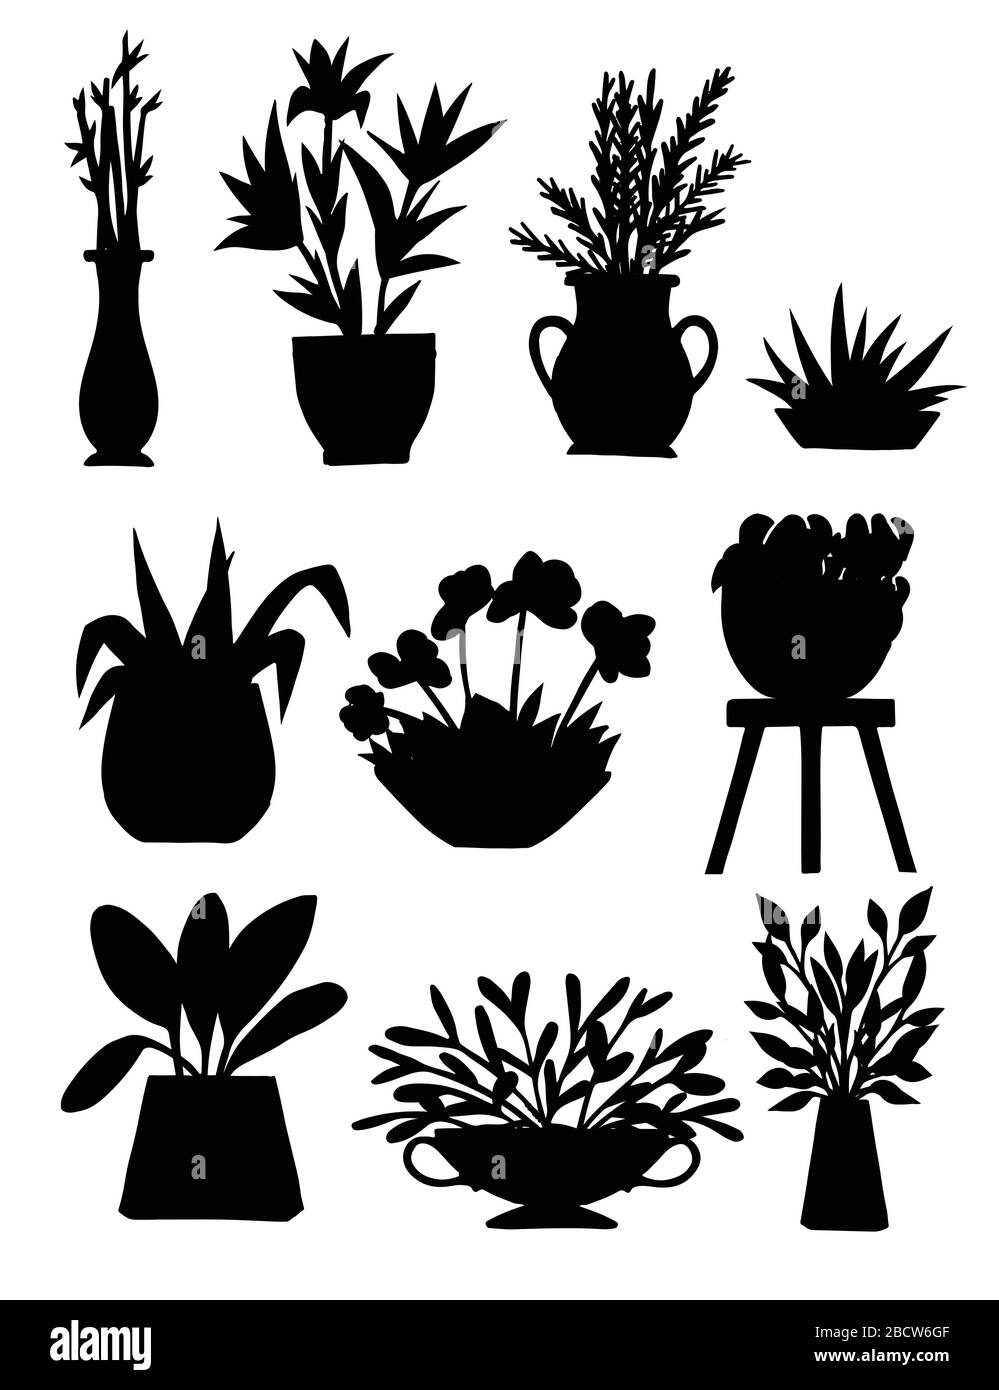 Black silhouette home decorative and outdoor garden plants in pots set plants flat vector illustration isolated on white background Stock Vector